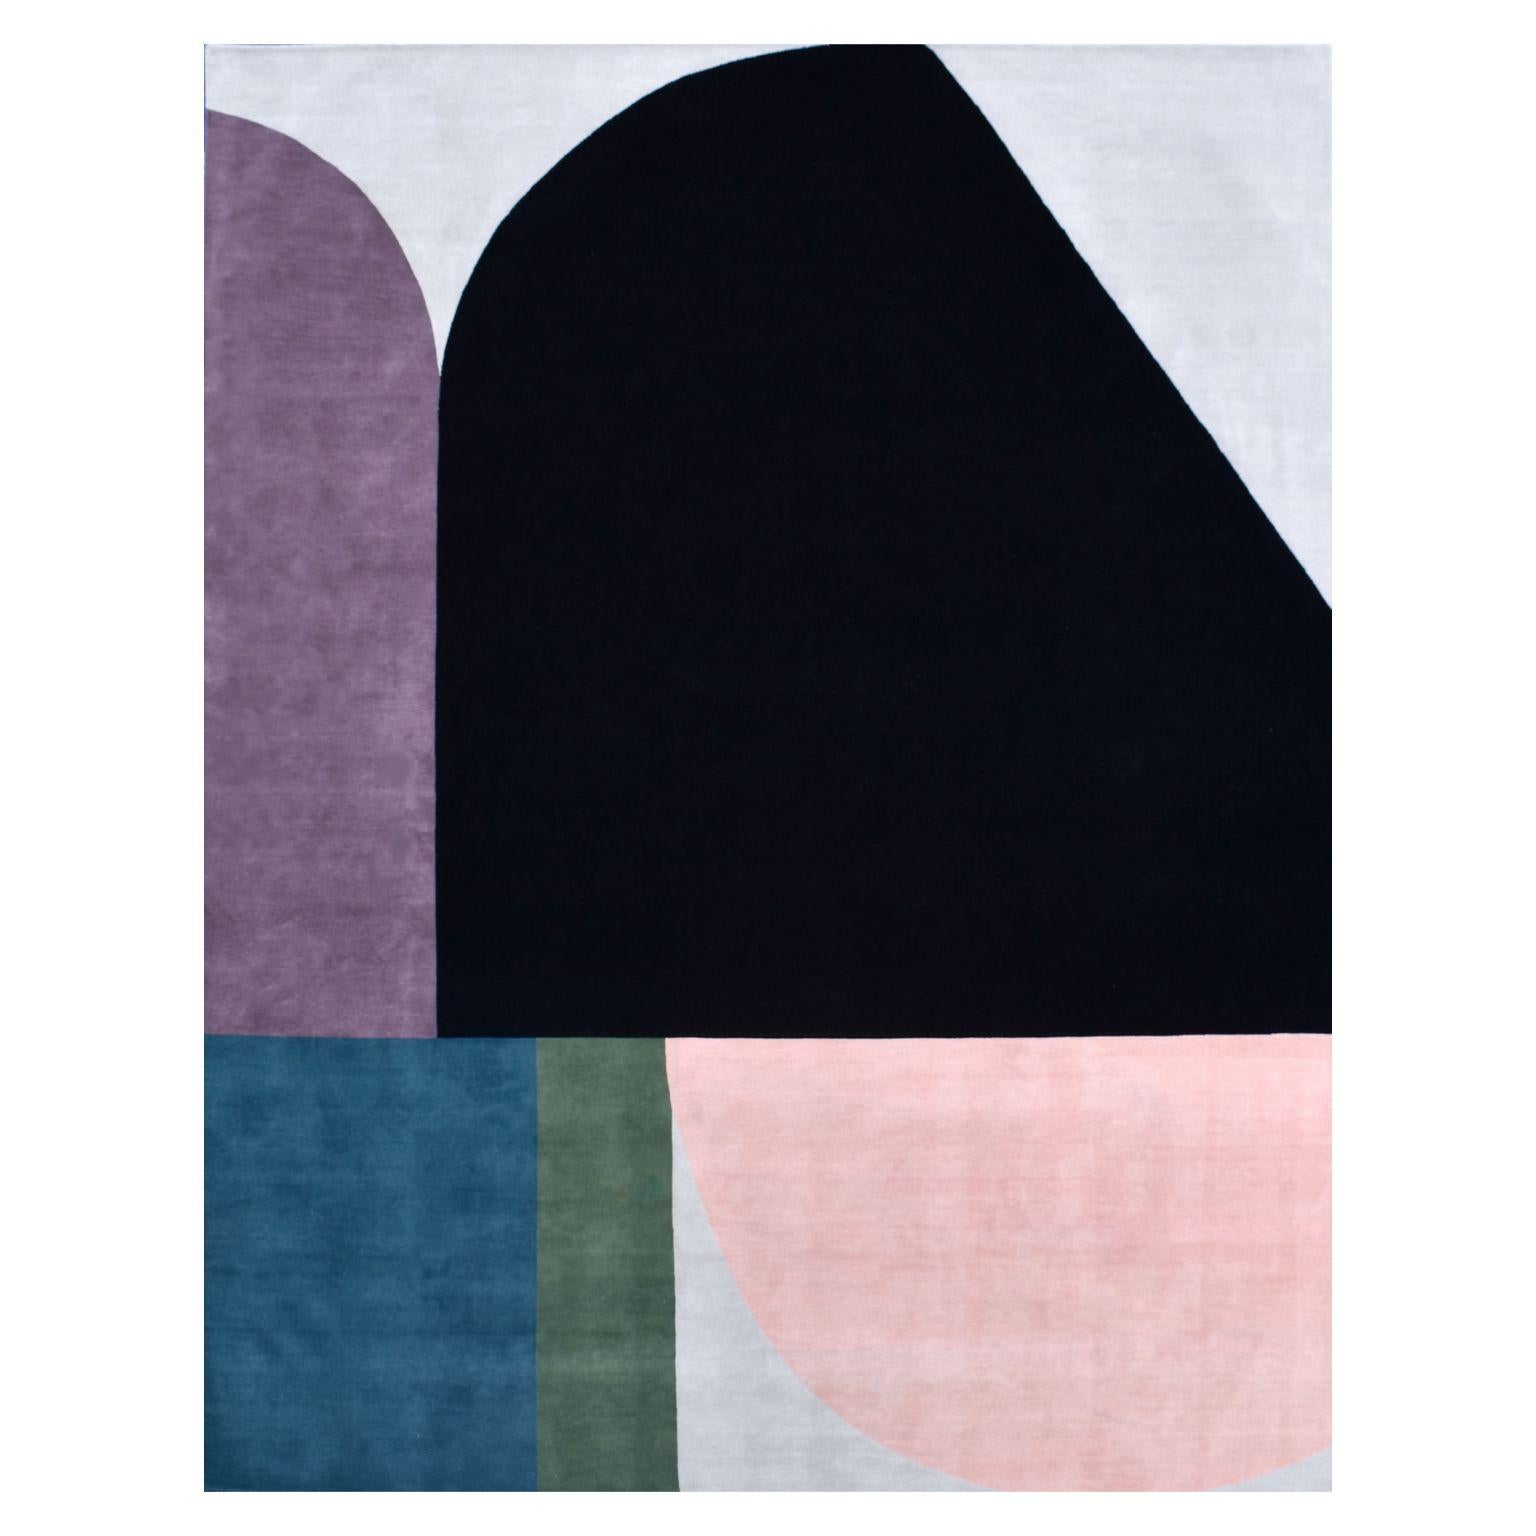 Playful large rug by Art & Loom
Dimensions: D 304.8 x H 426.7 cm
Materials: New Zealand wool & Chinese silk
Quality (Knots per Inch): 100
Also available in different dimensions.

Samantha Gallacher has always had a keen eye for aesthetics,